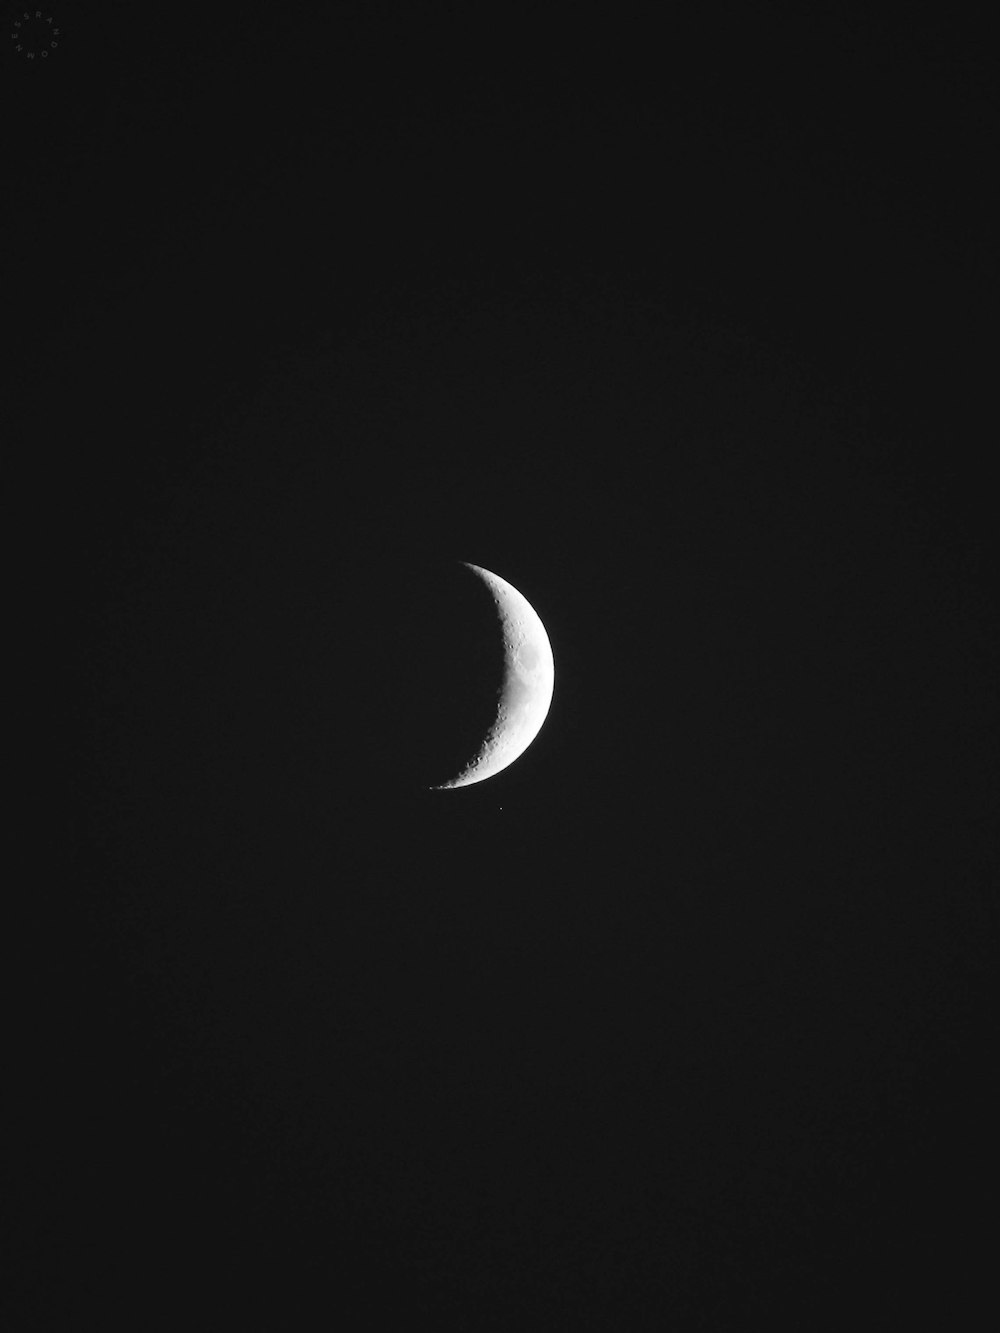 100+ Half Moon Pictures | Download Free Images on Unsplash